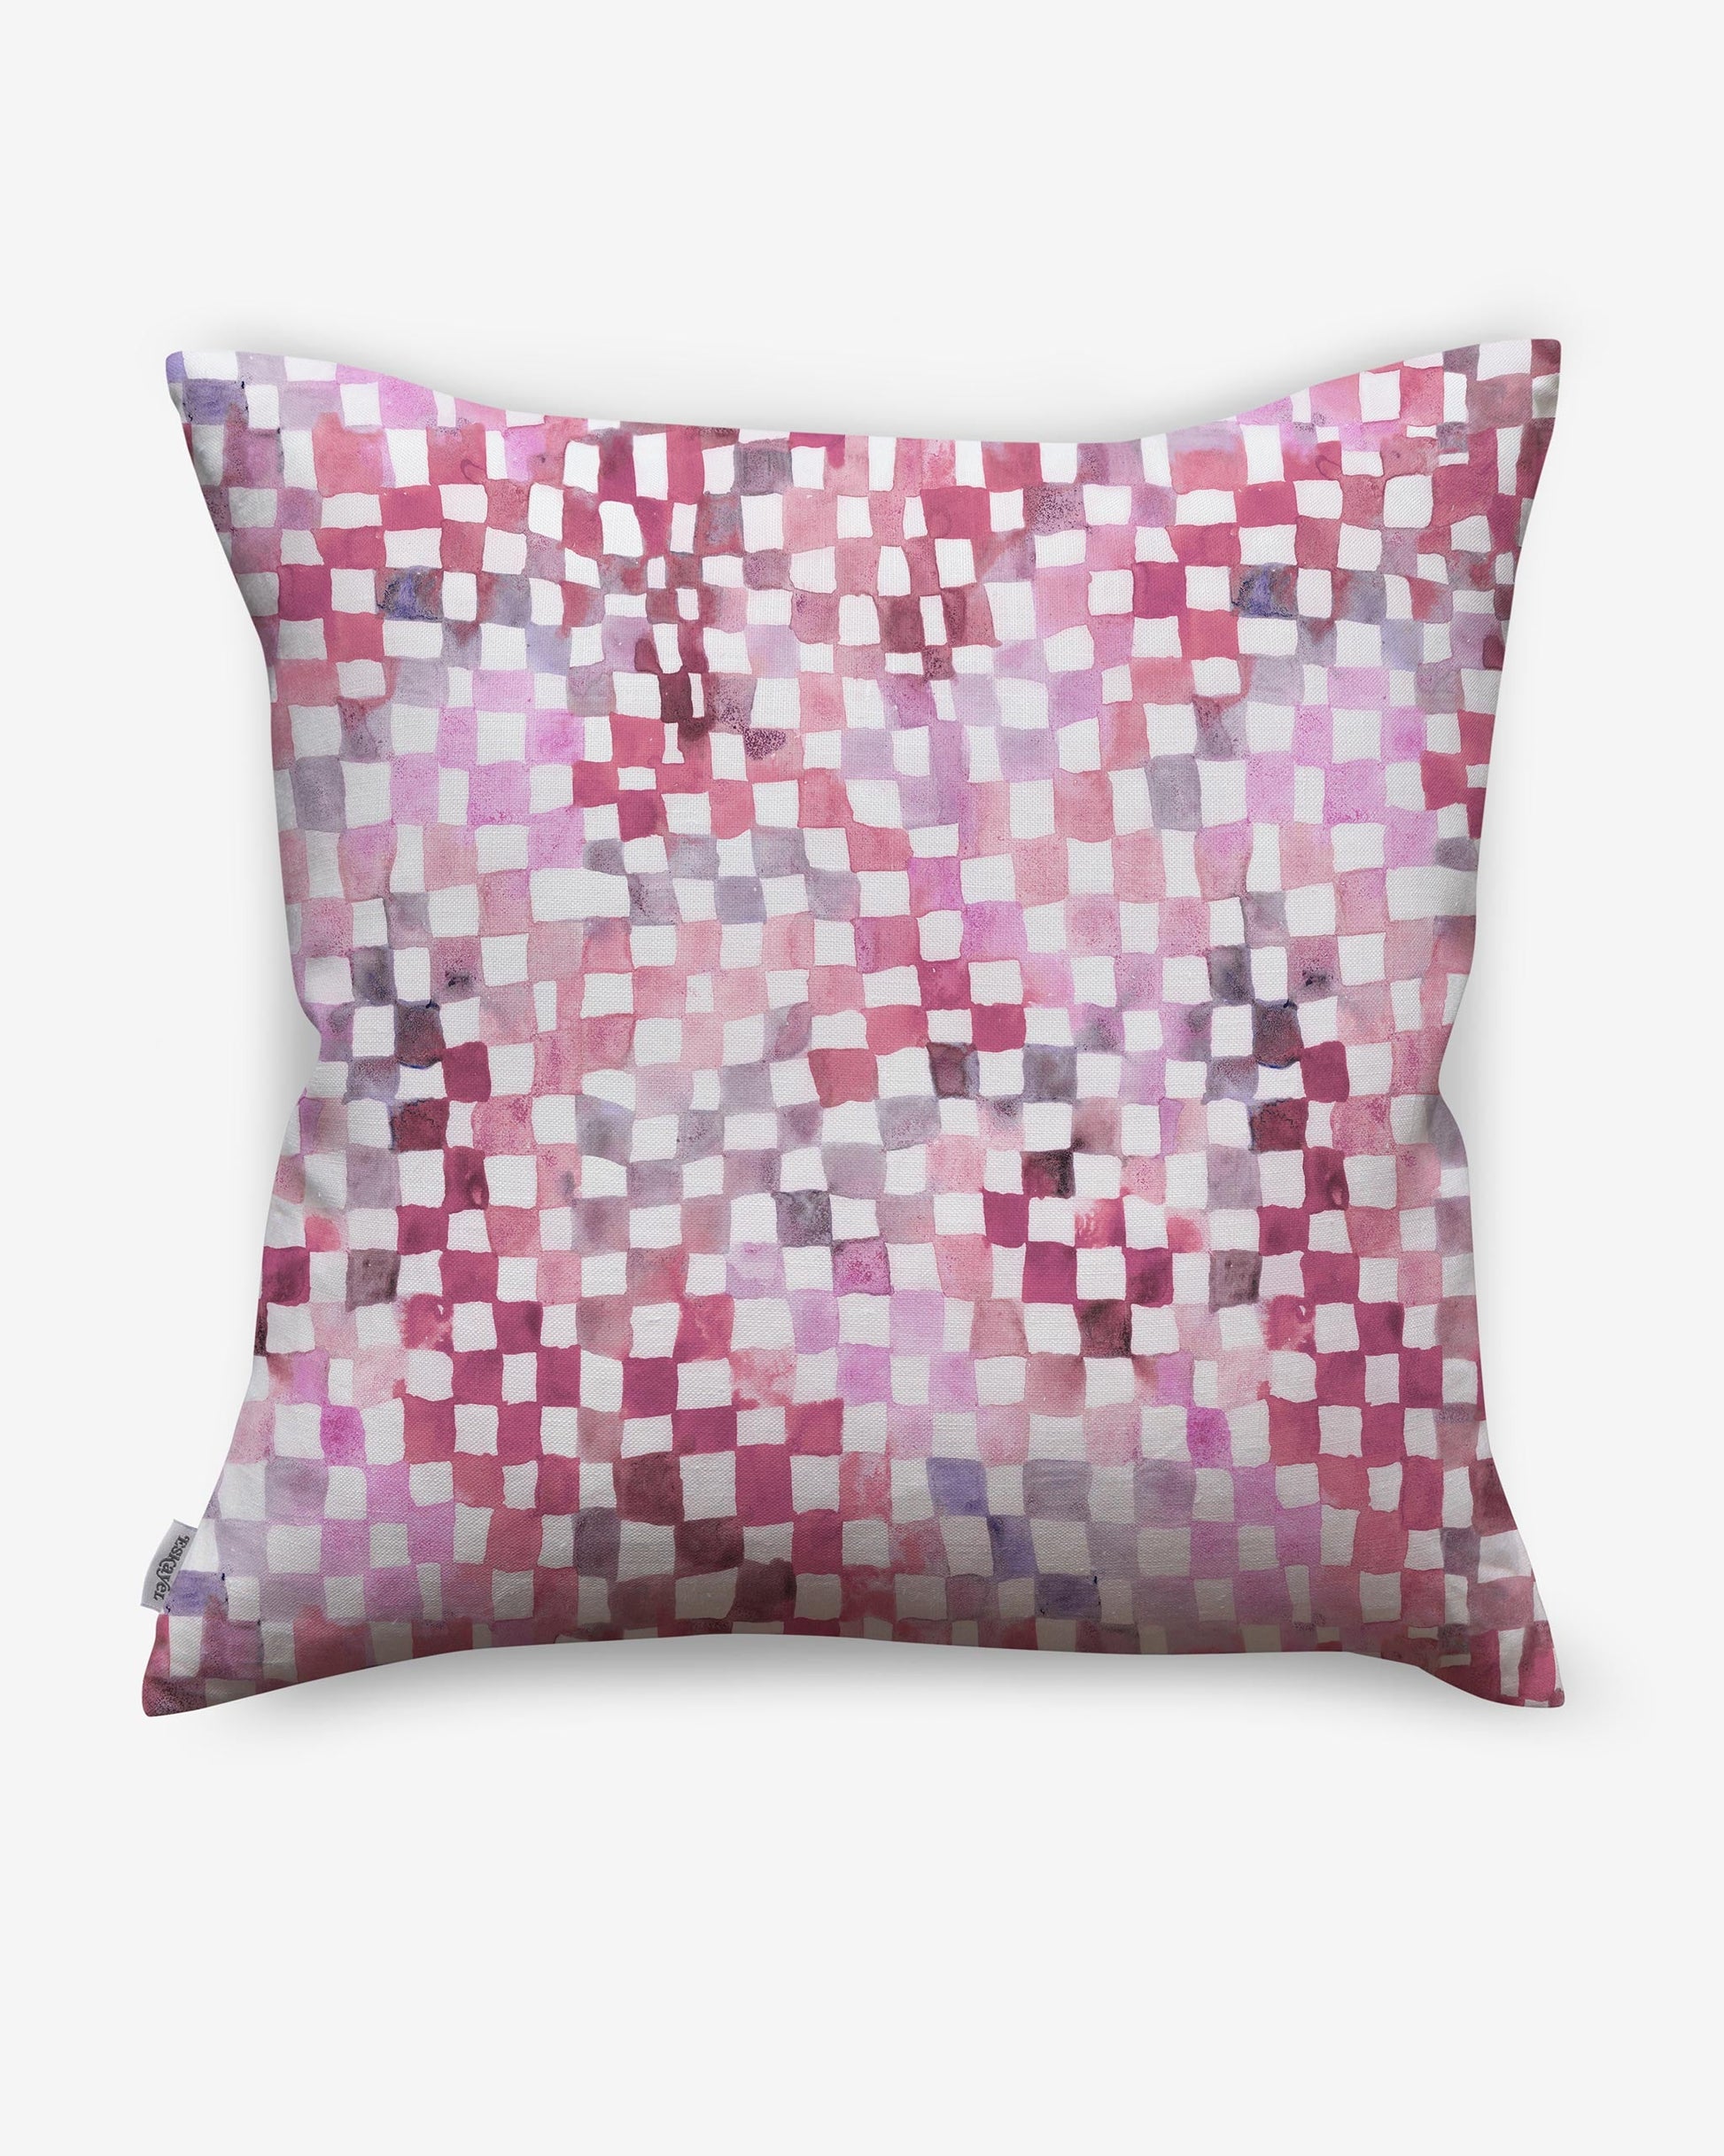 A Chess Pillow Coral pillow with a checkerboard pattern in an improvisational design